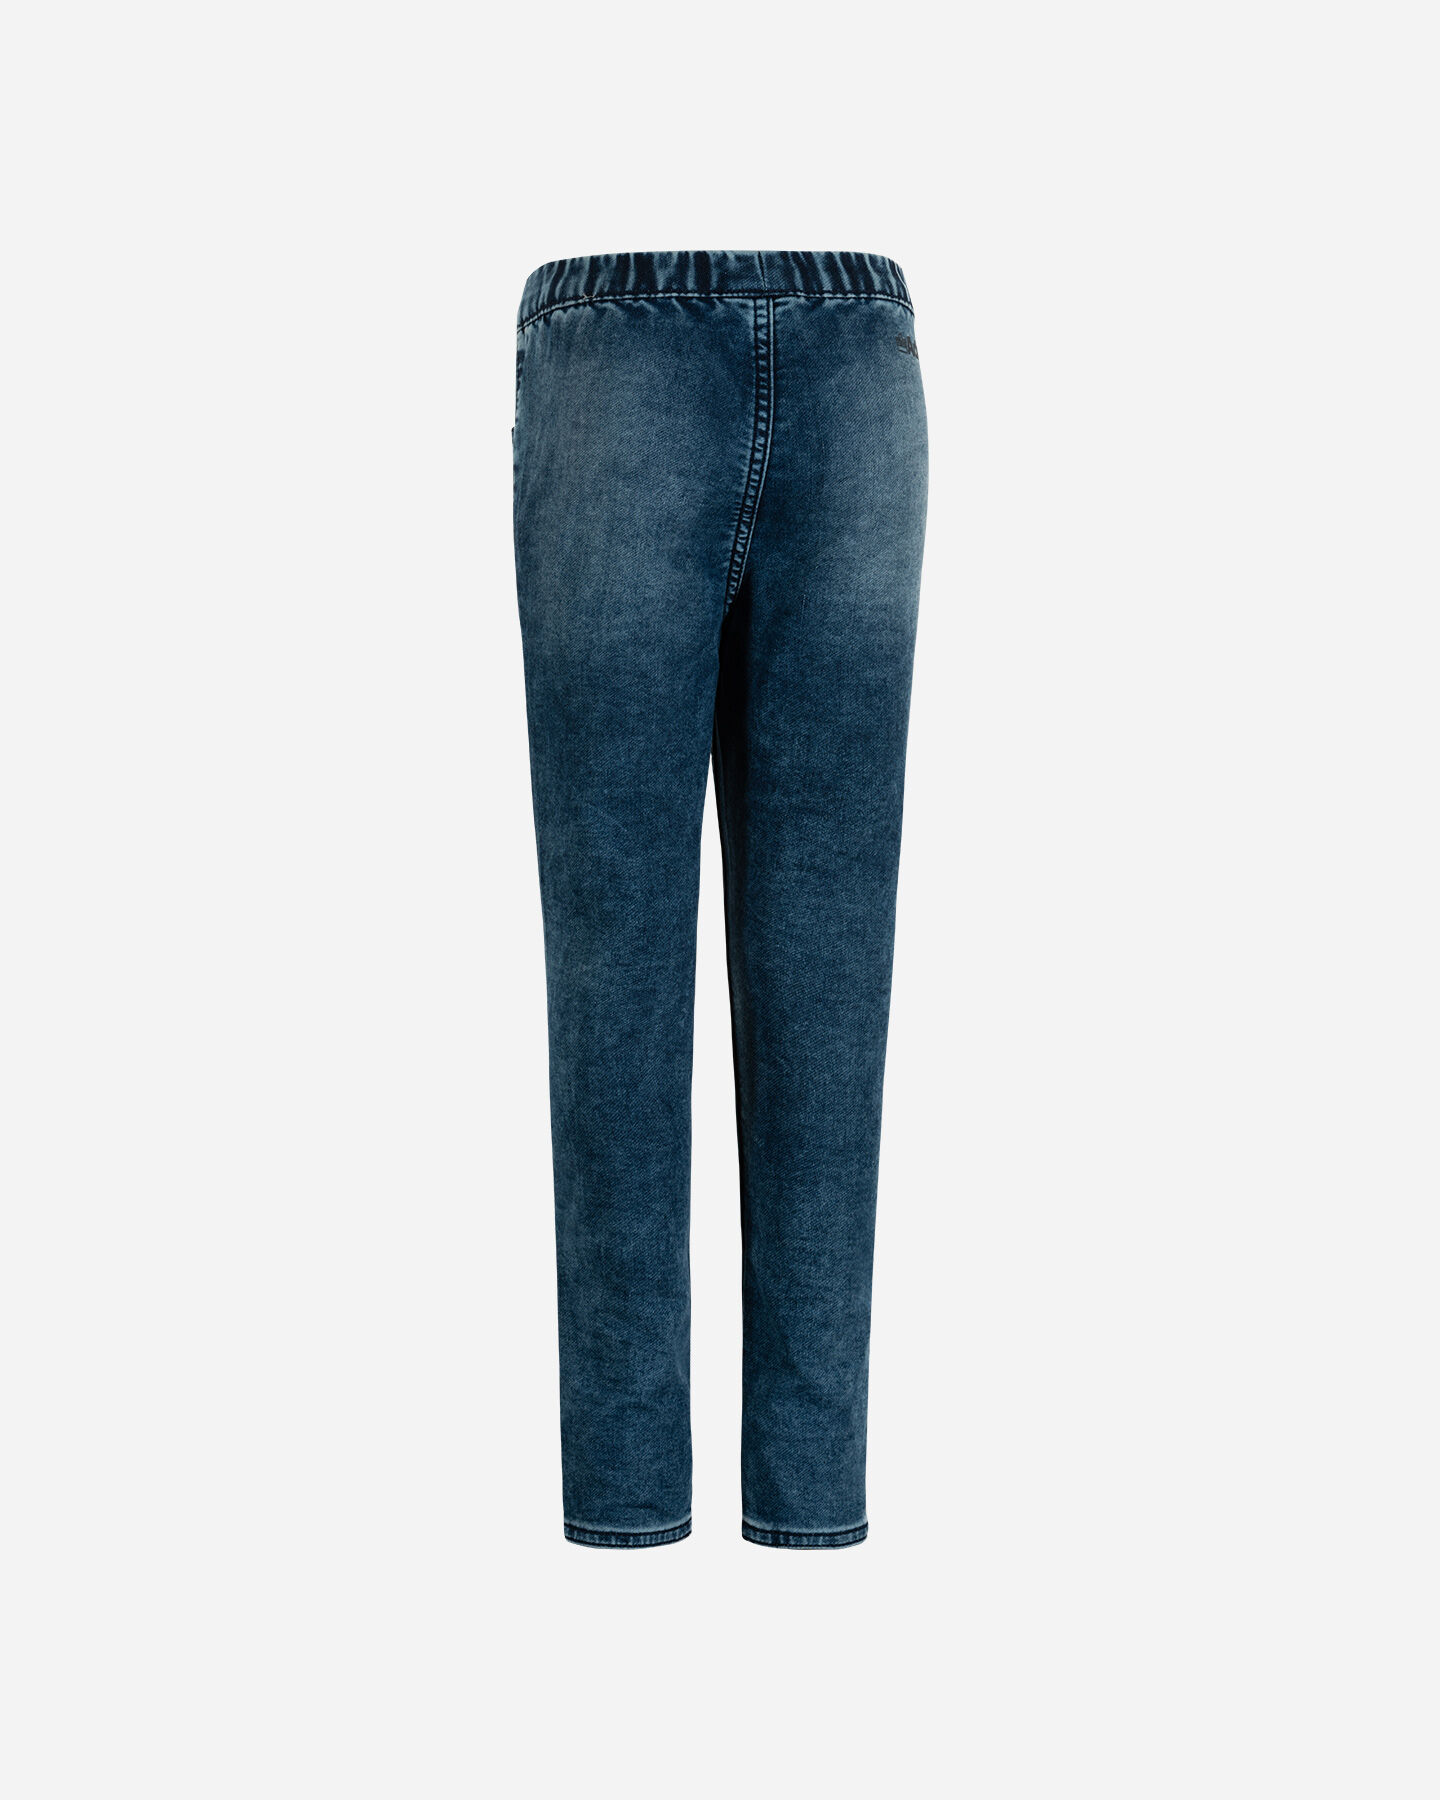  Jeans ADMIRAL LIFESTYLE JR S4106387|DDBLUE|10A scatto 1